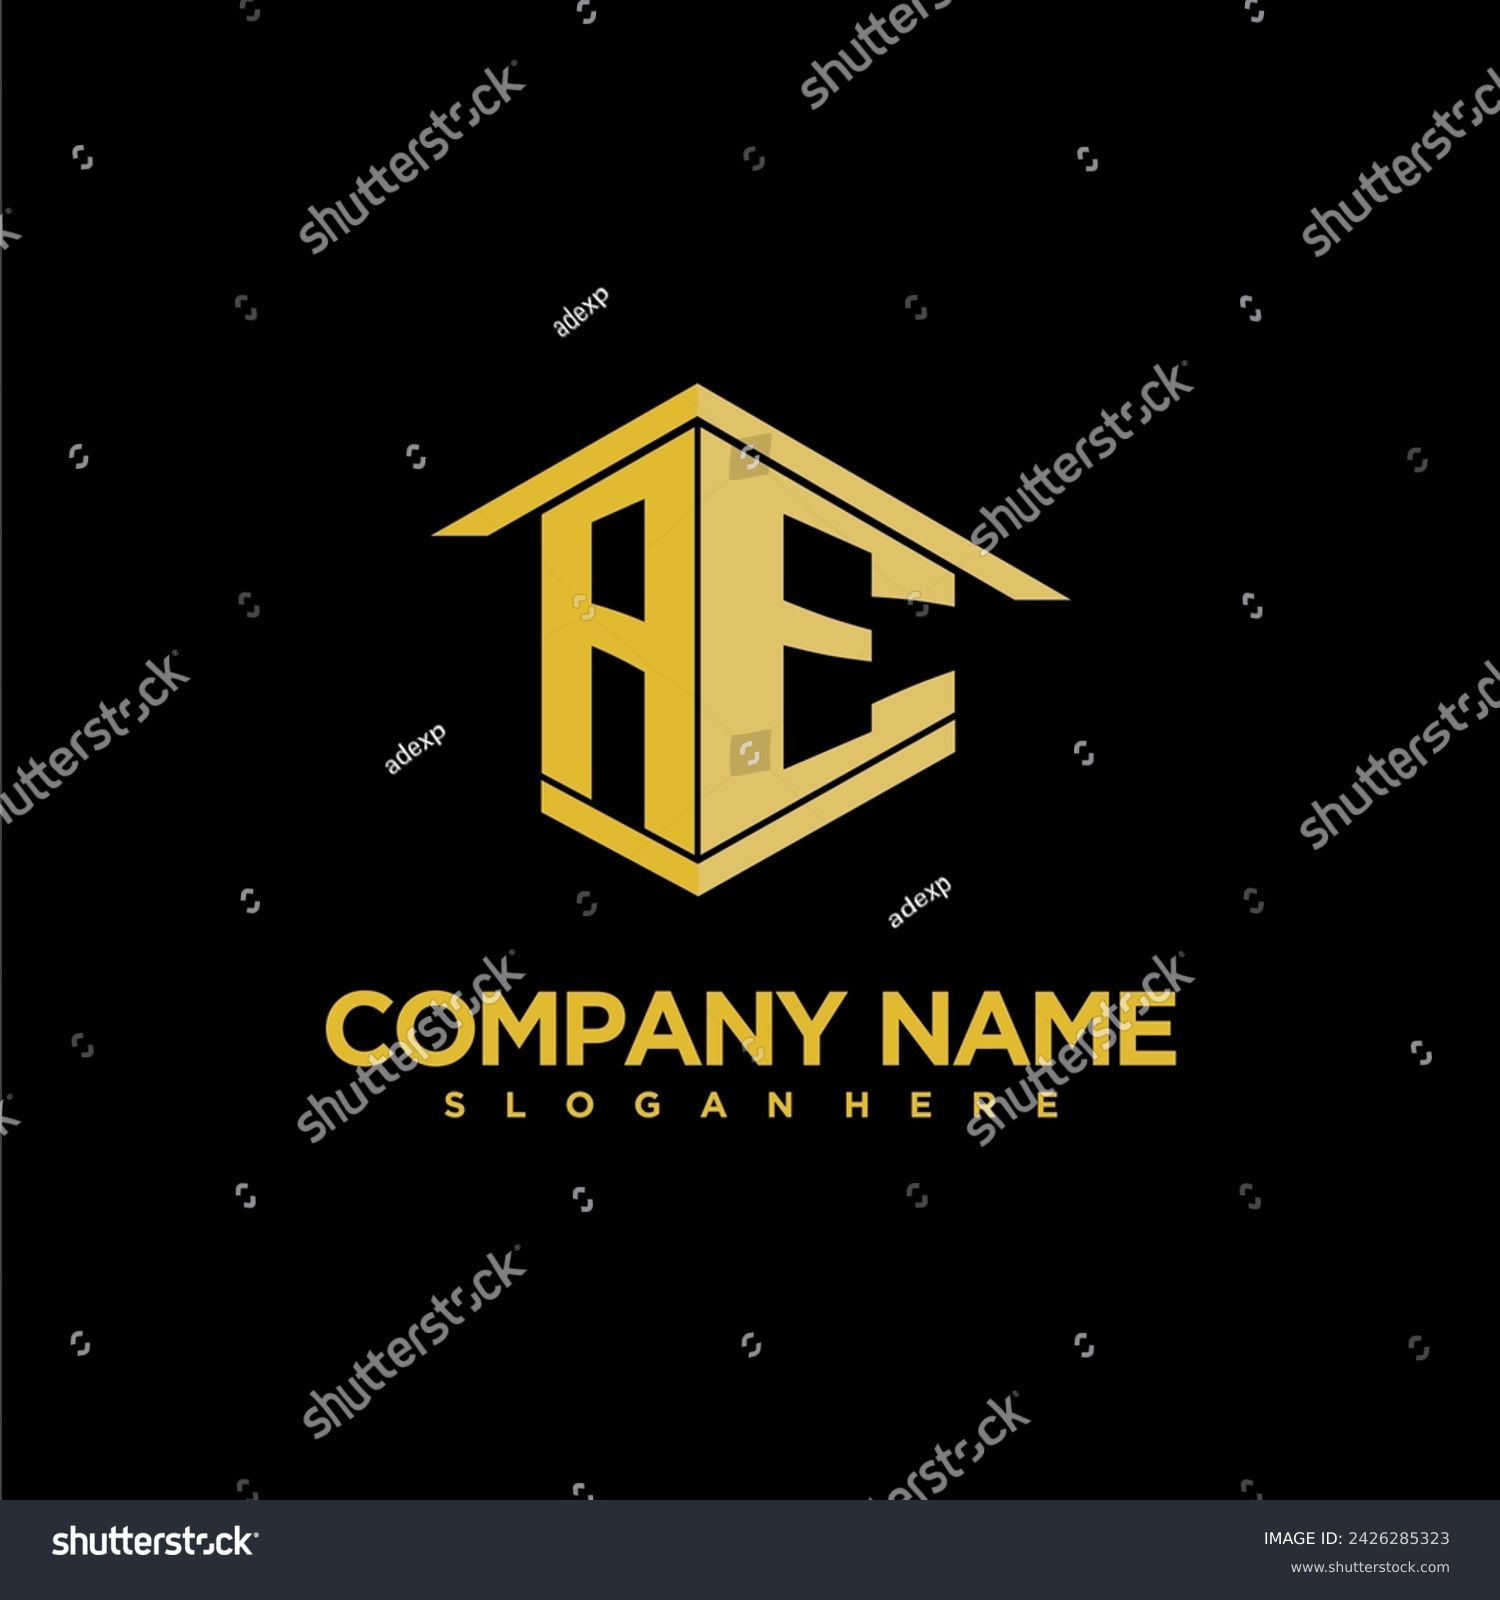 SVG of AE initial monogram logo for real estate with creative building style design svg